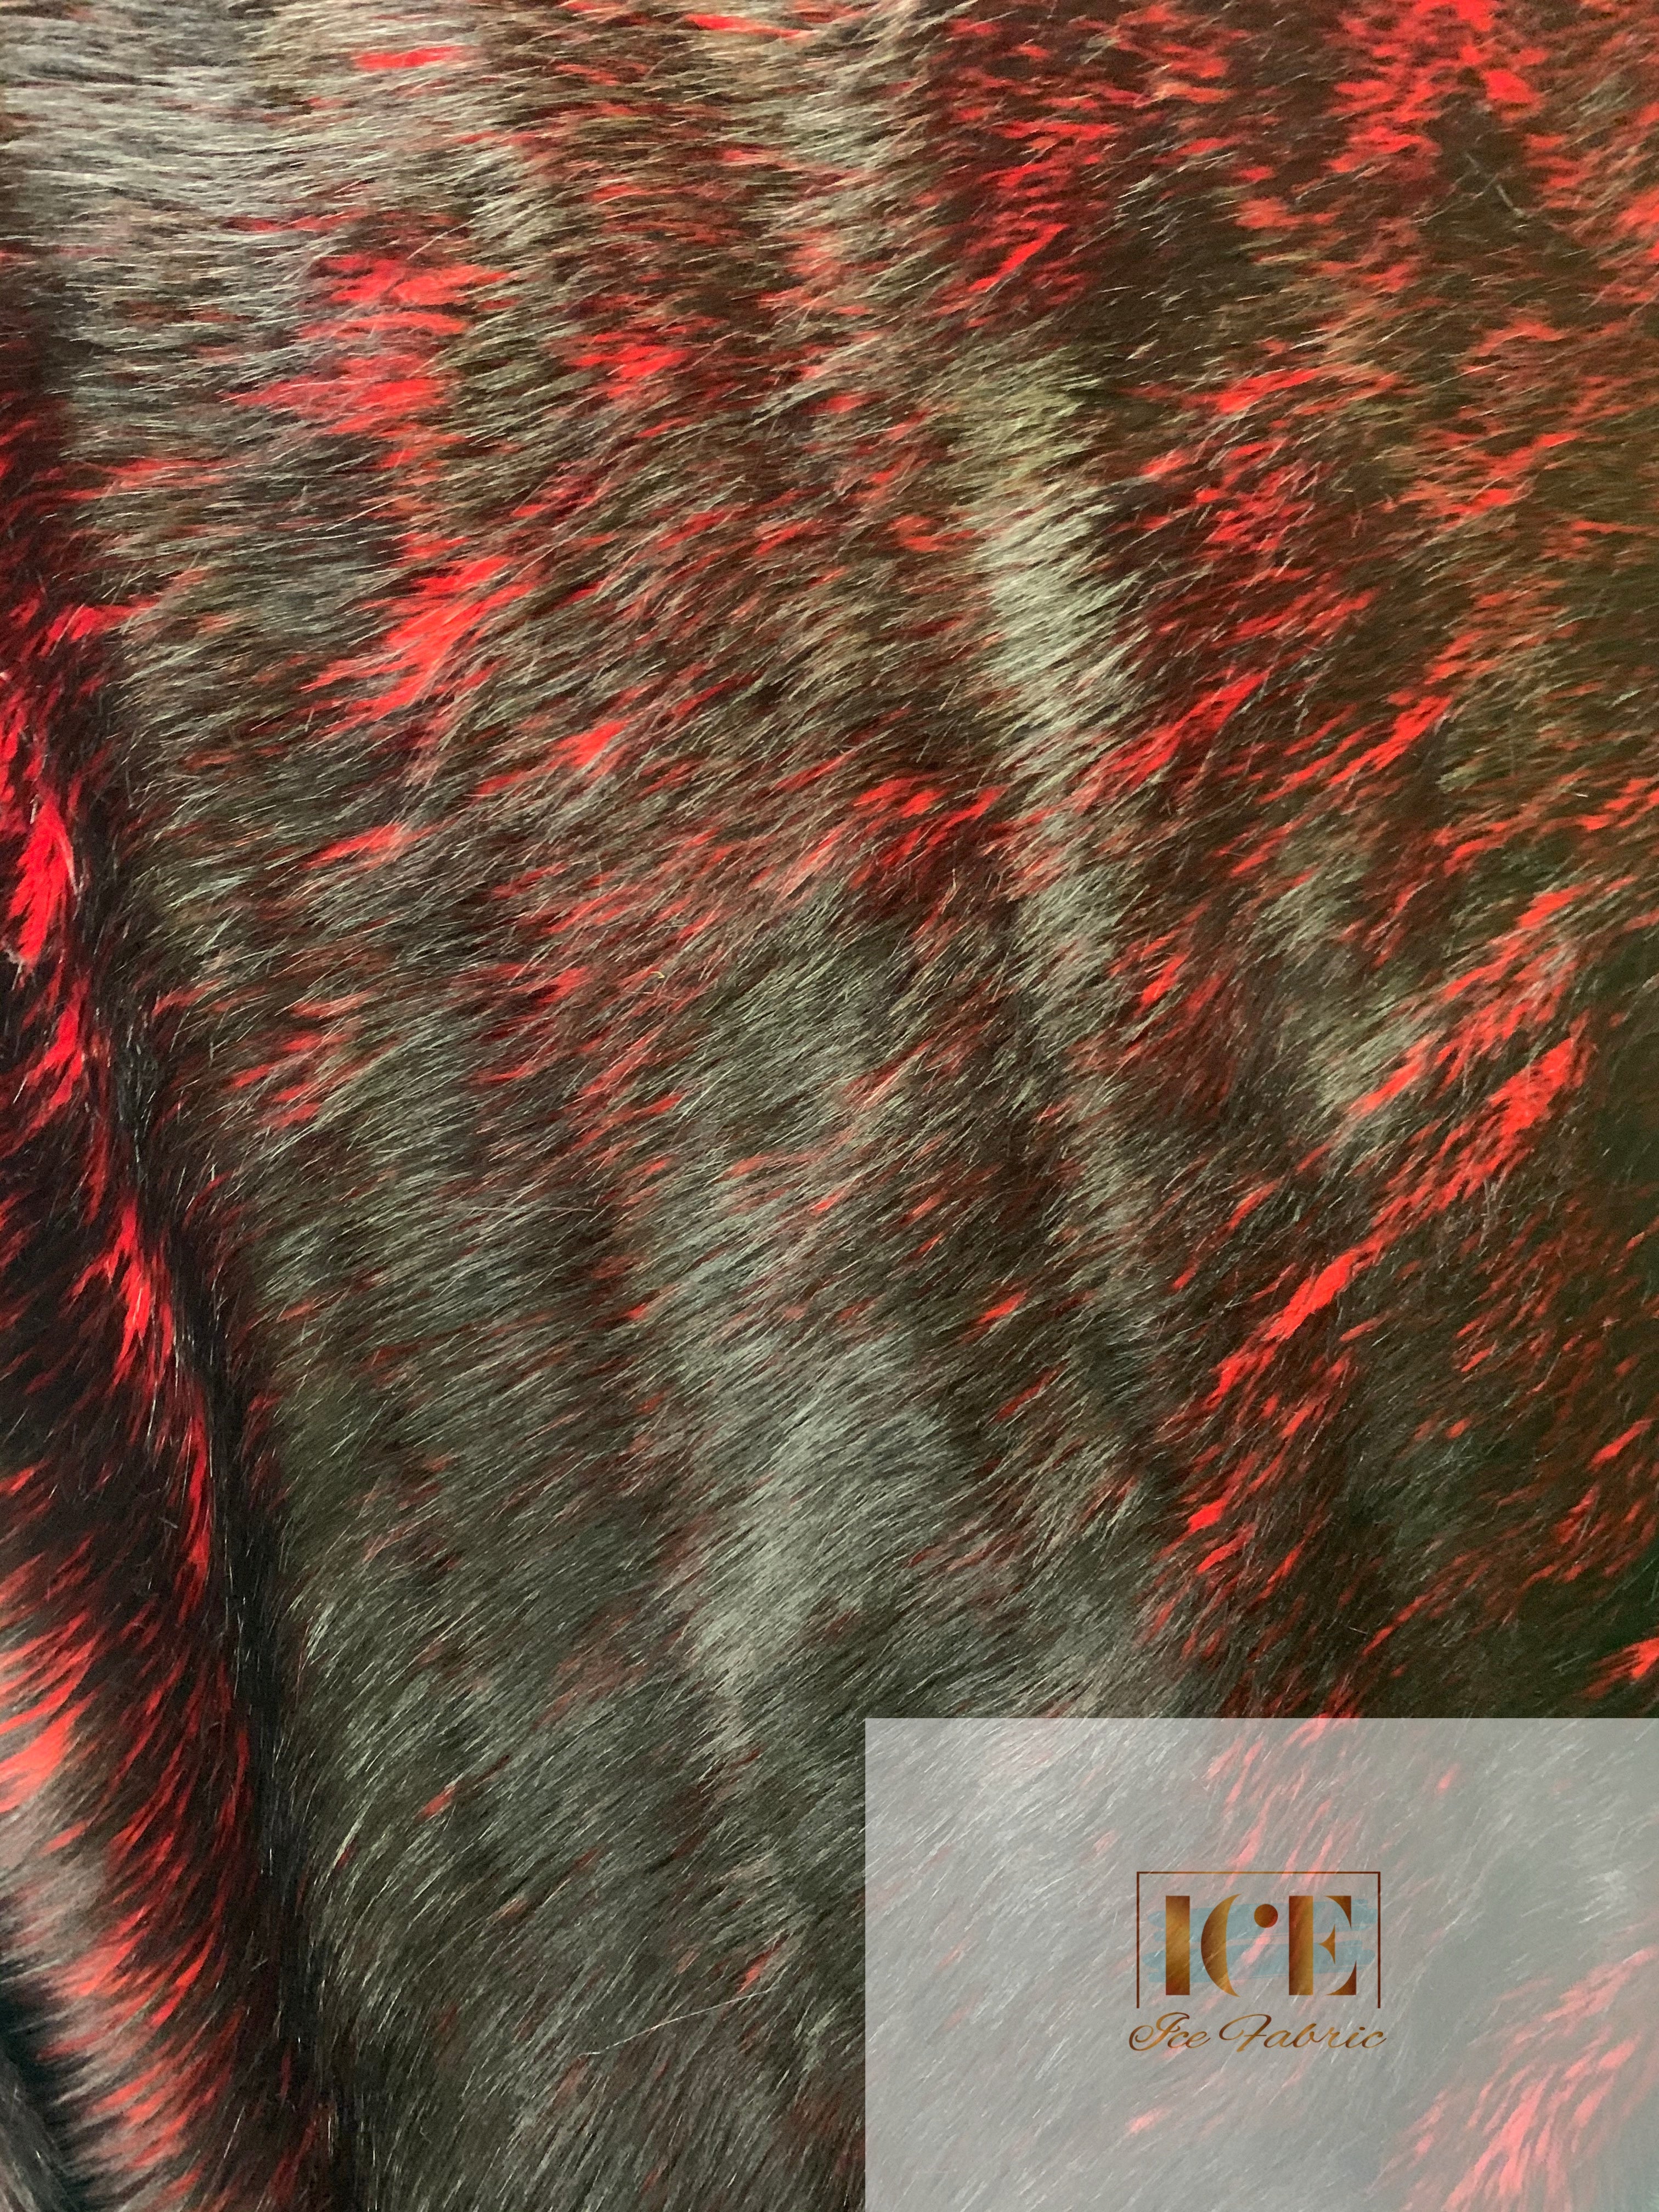 Canadian Fox 2 Tone Shaggy Long Pile Faux Fur Fabric For Blankets, Costumes, Bed SpreadICEFABRICICE FABRICSRed and BlackBy The Yard (60 inches Wide)Canadian Fox 2 Tone Shaggy Long Pile Faux Fur Fabric For Blankets, Costumes, Bed Spread ICEFABRIC Red and Black